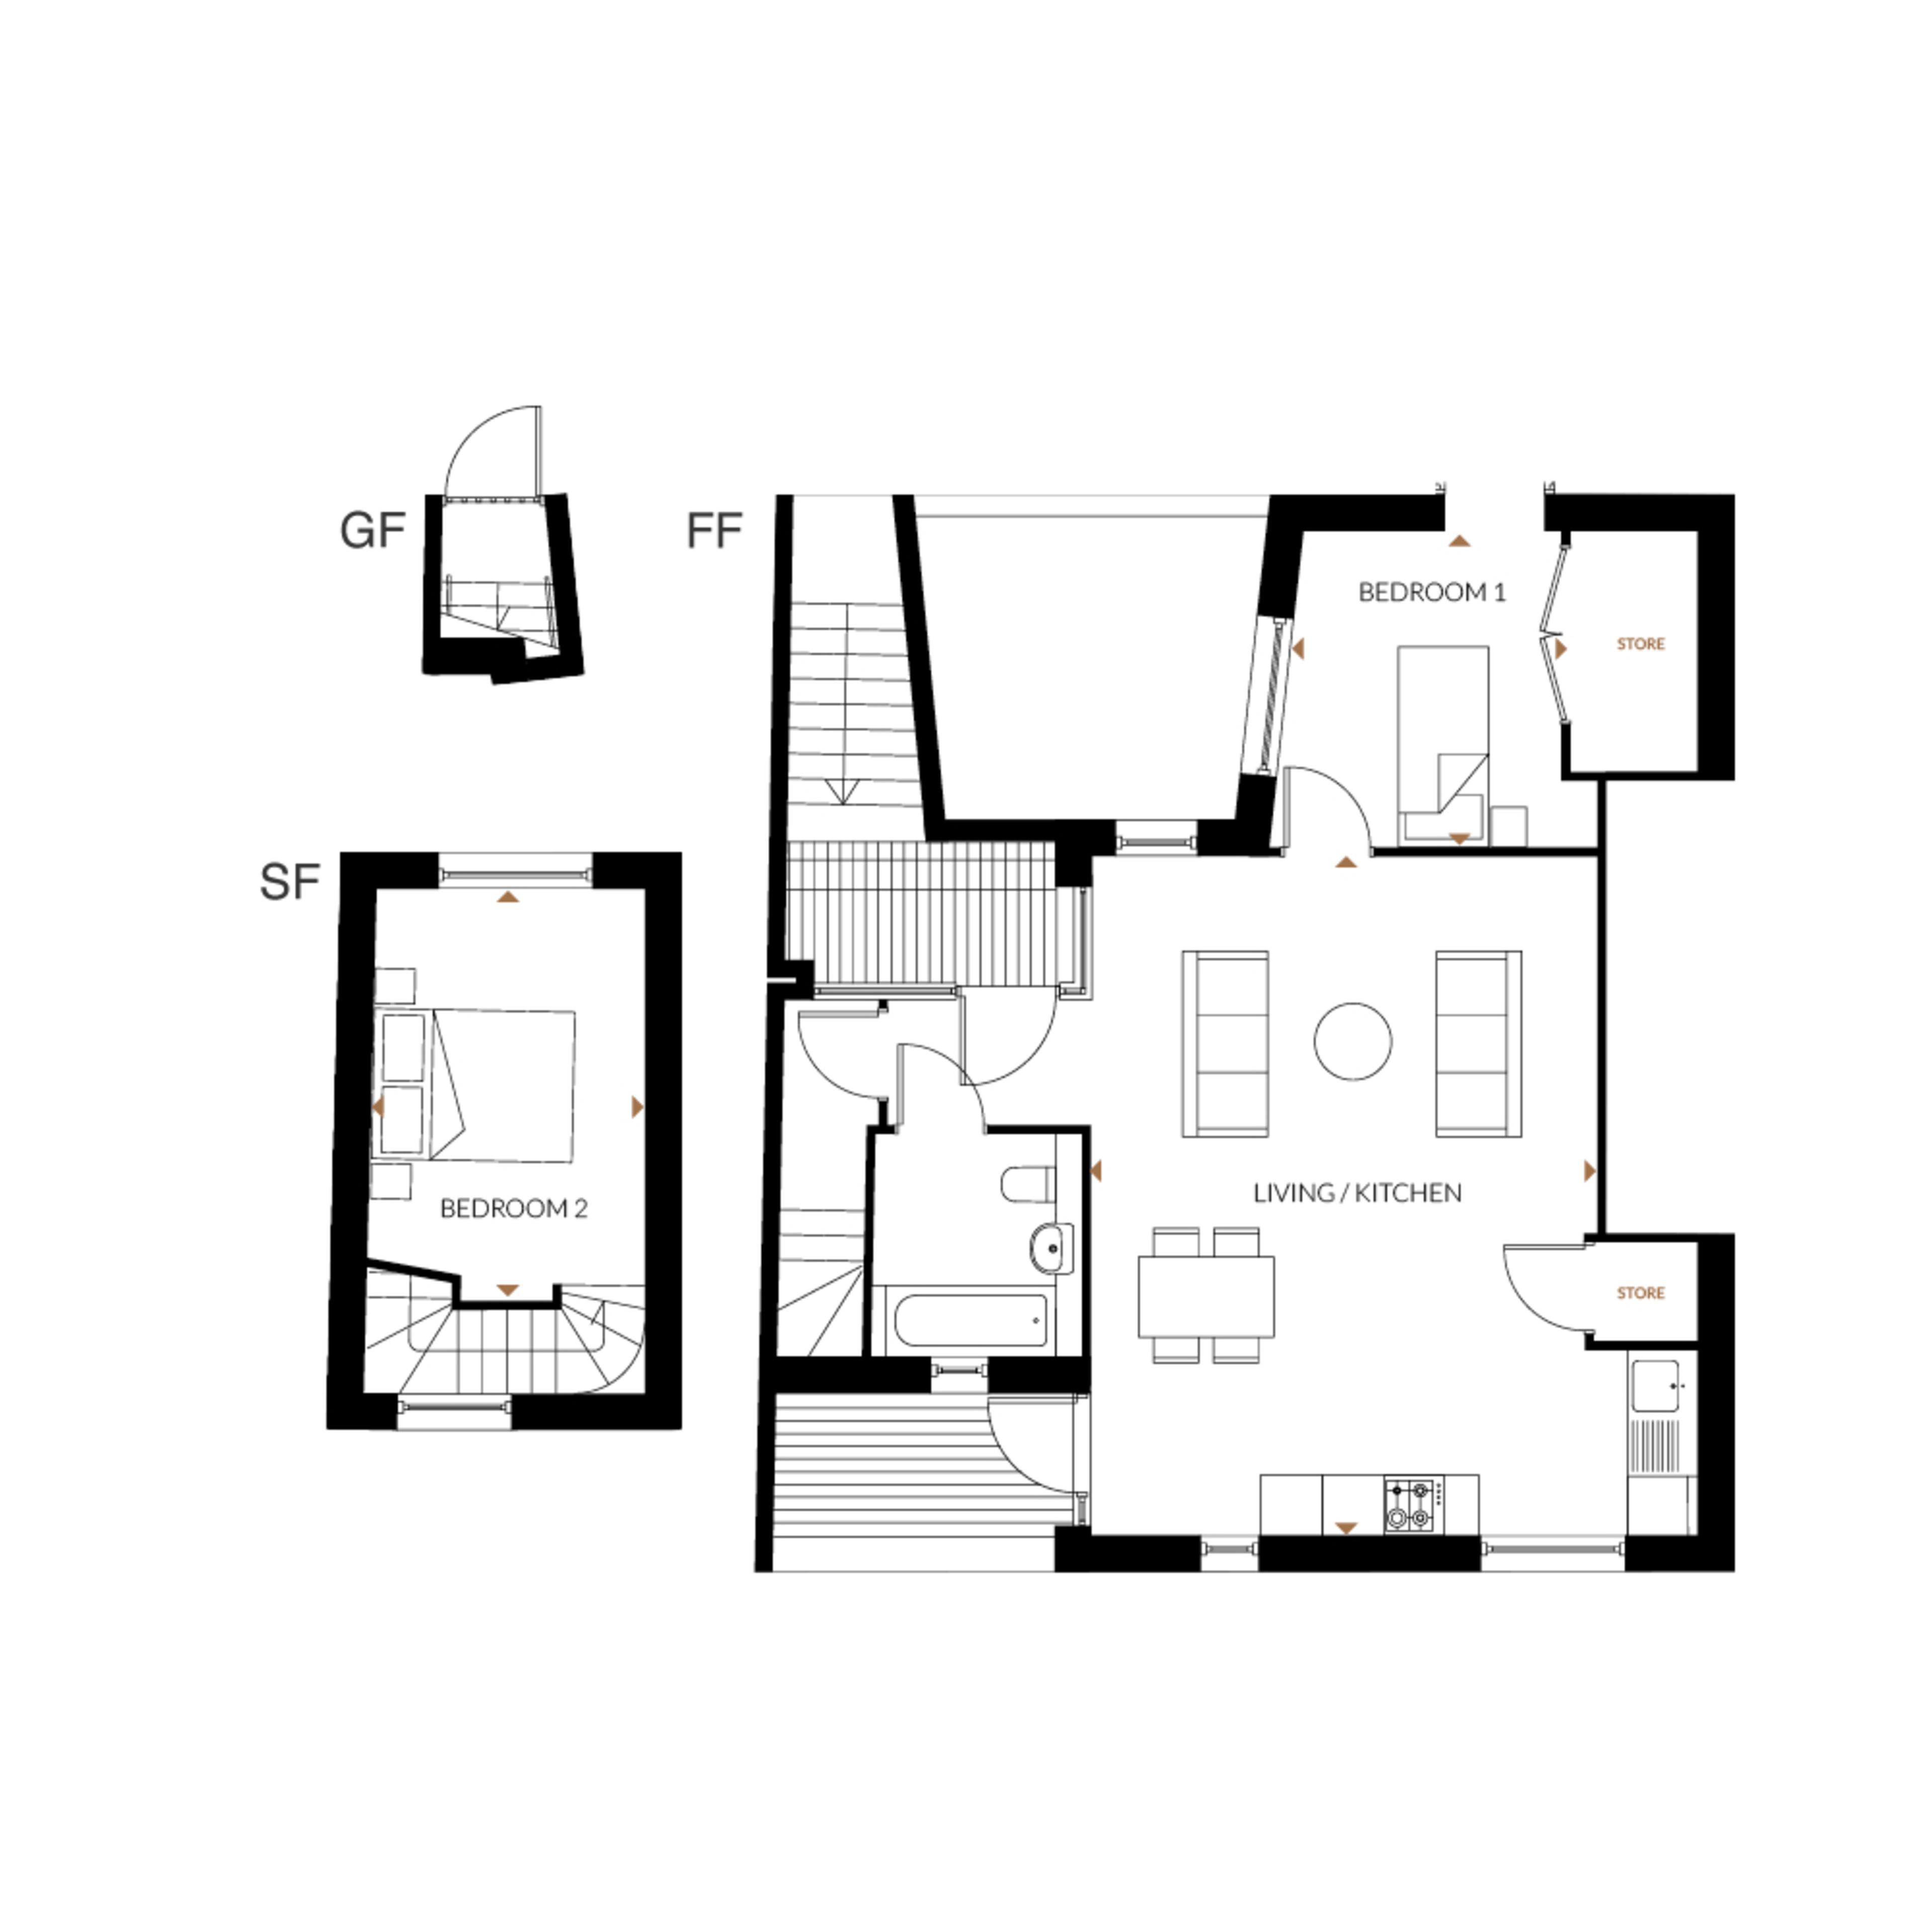 persona-homes-edgewood-mews-flats-for-sale-north-london-floorplan-2-bed-type-a